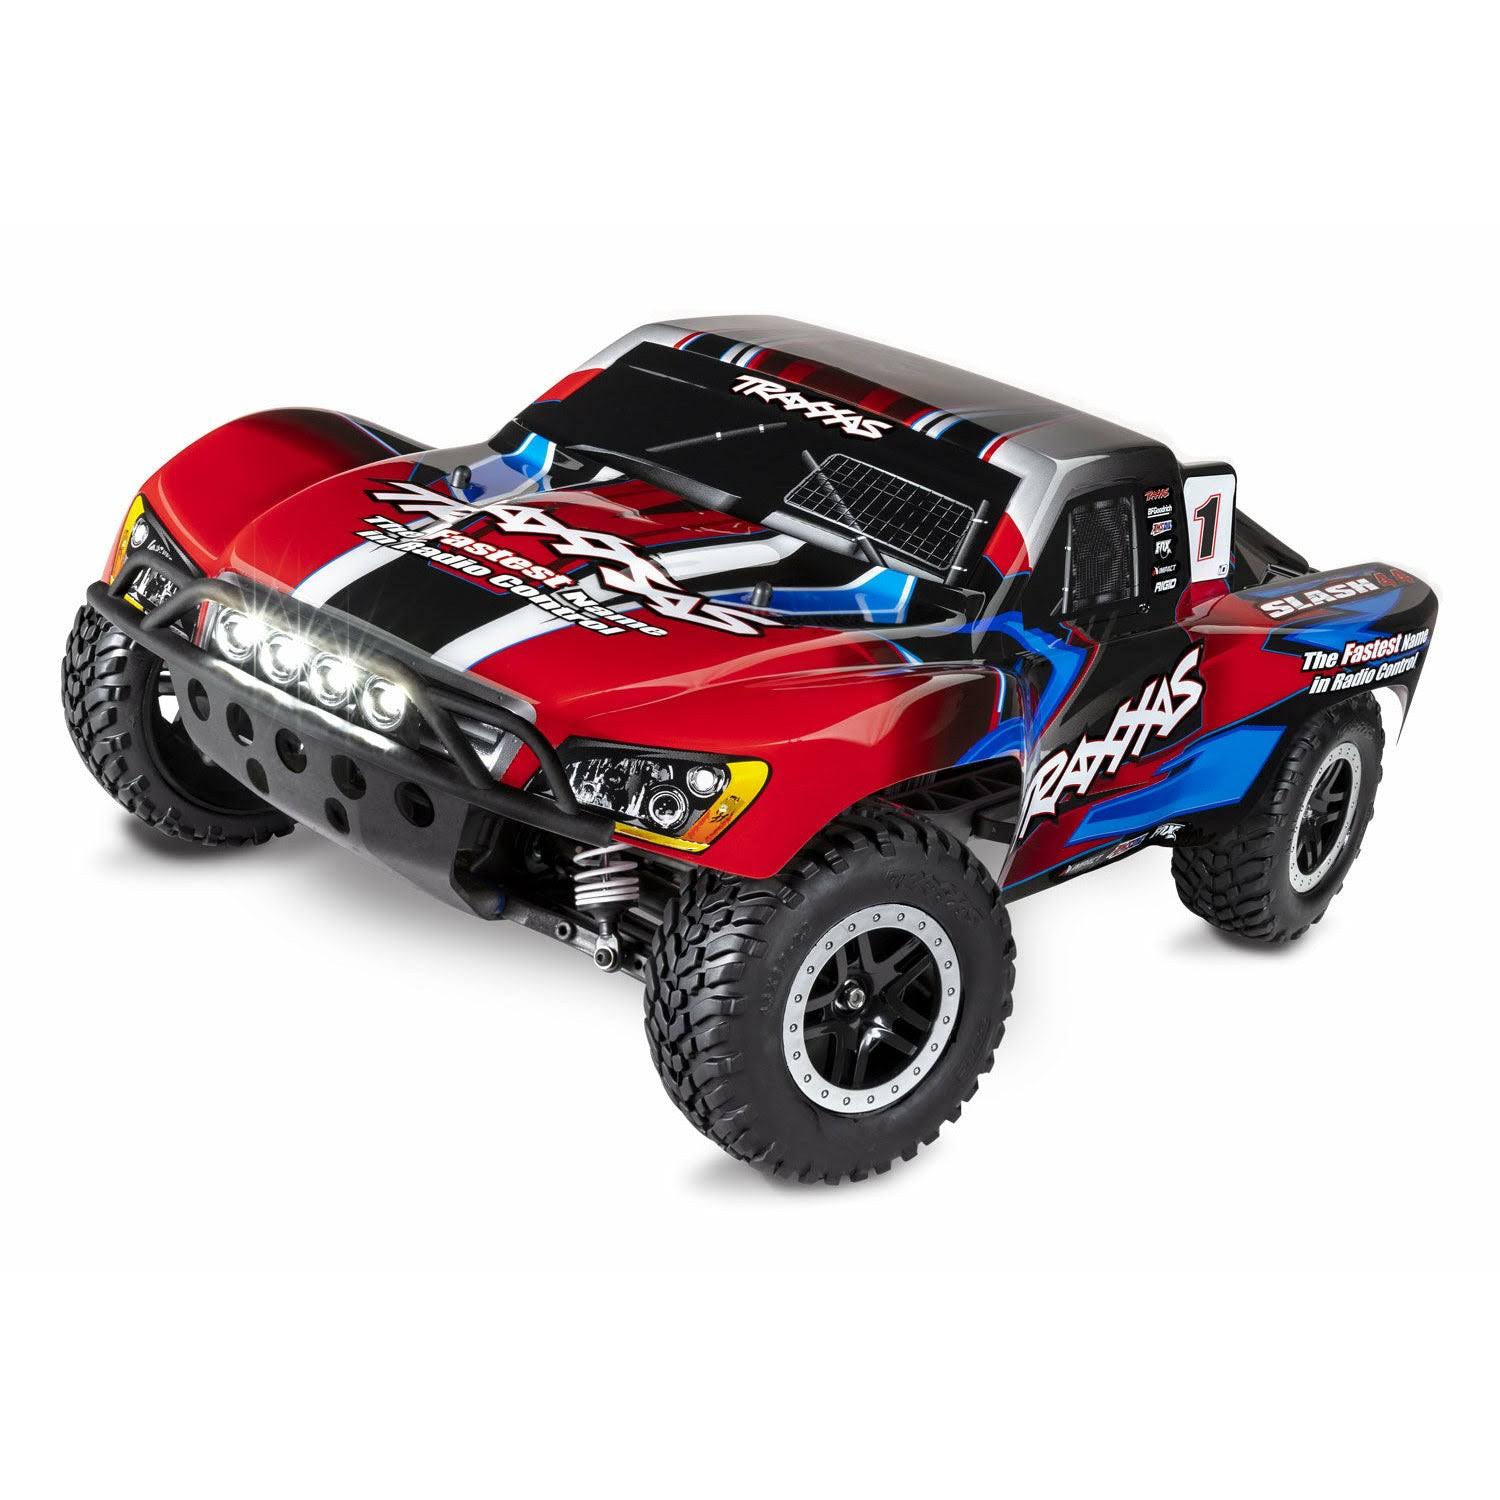 Traxxas Slash 4x4 RTR 4WD Brushed Short Course Truck (Red) w/LED Lights 68054-61RED